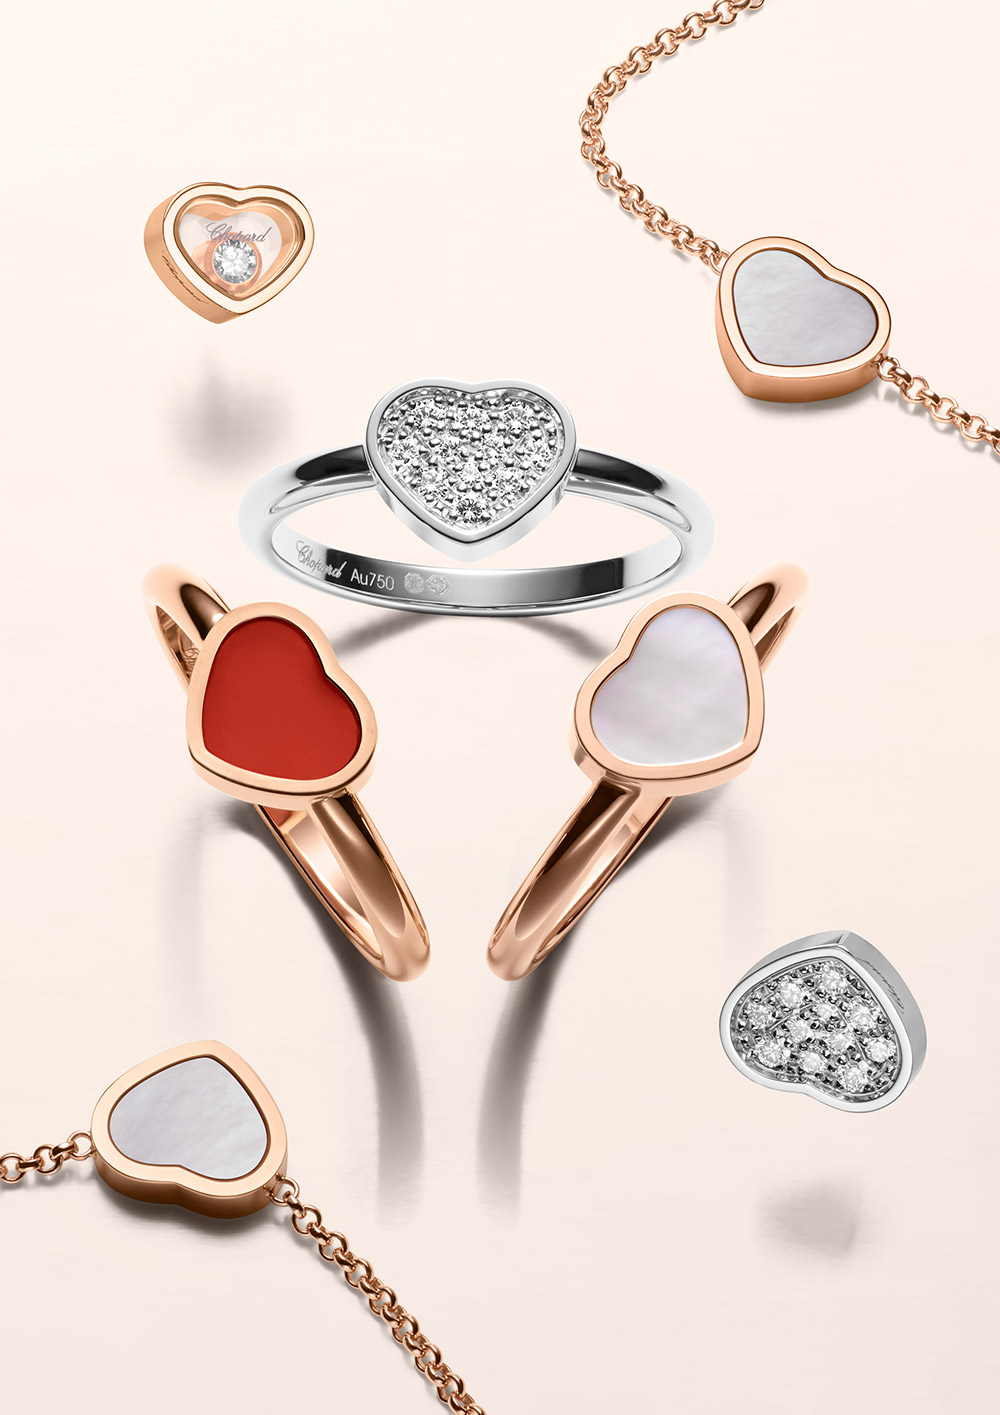 The Chopard My Happy Hearts collection